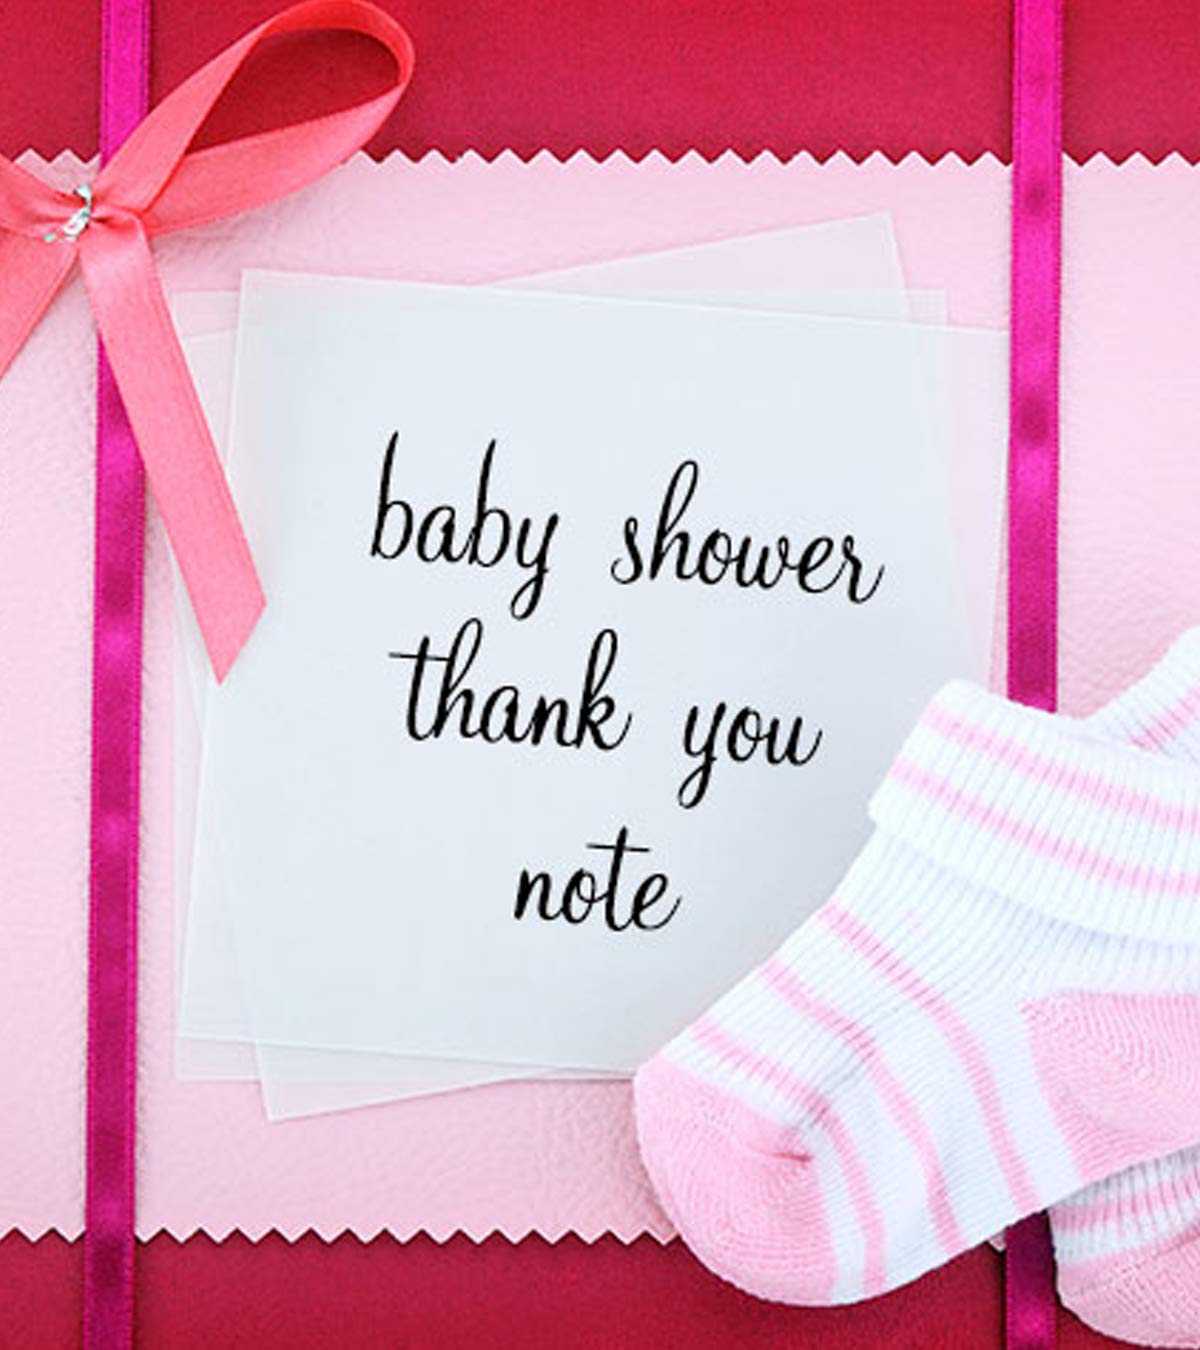 Baby Shower Thank You Notes: How To Write And What To Write (With Examples)